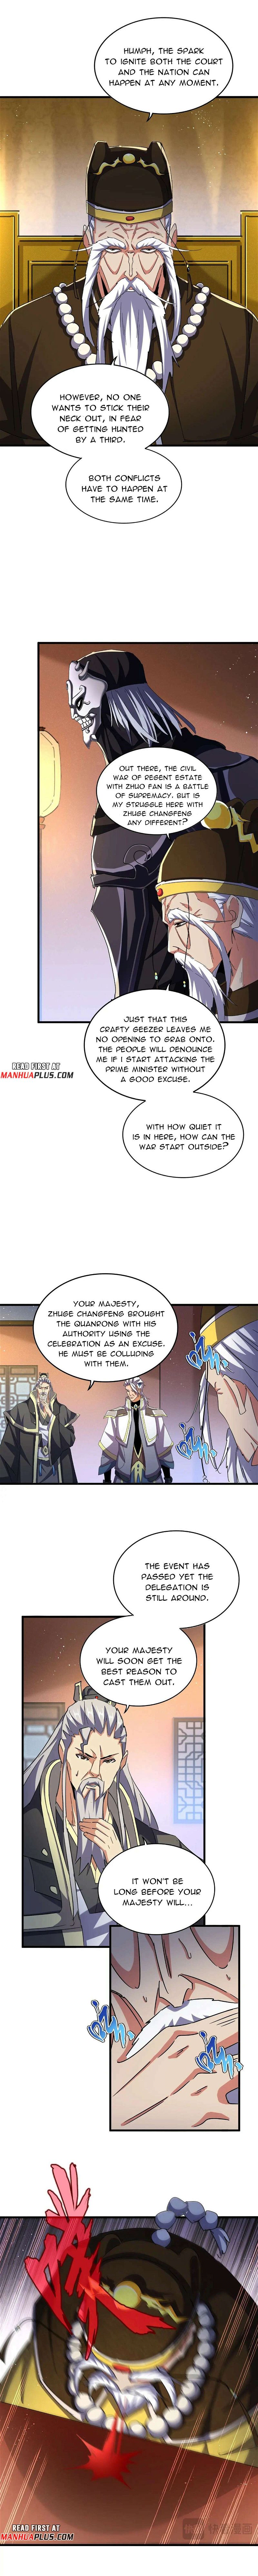 Demon Magic Emperor Chapter 446 page 2